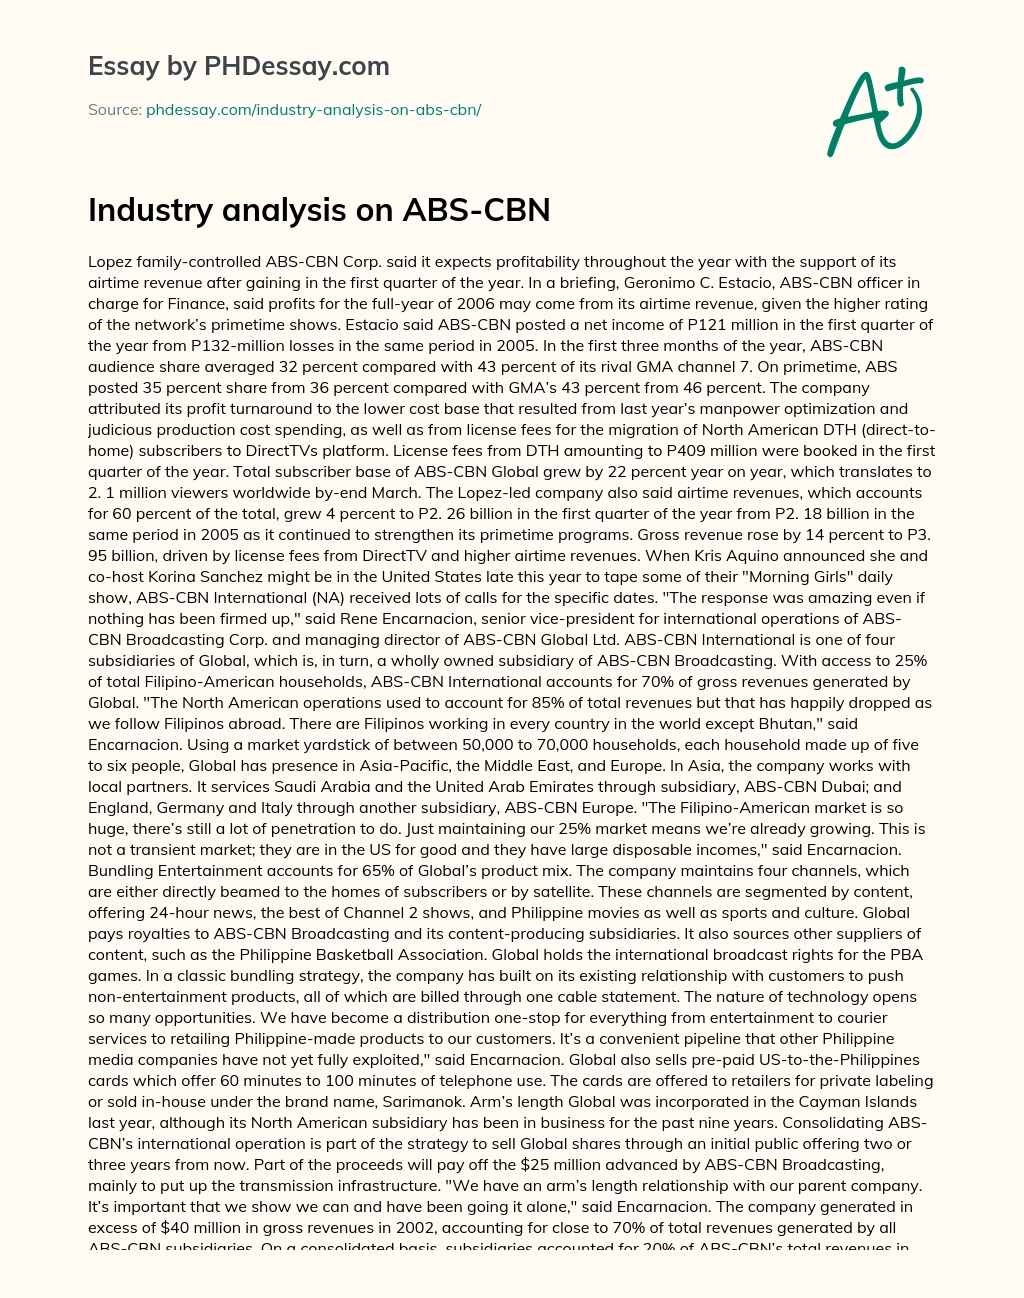 Industry analysis on ABS-CBN essay